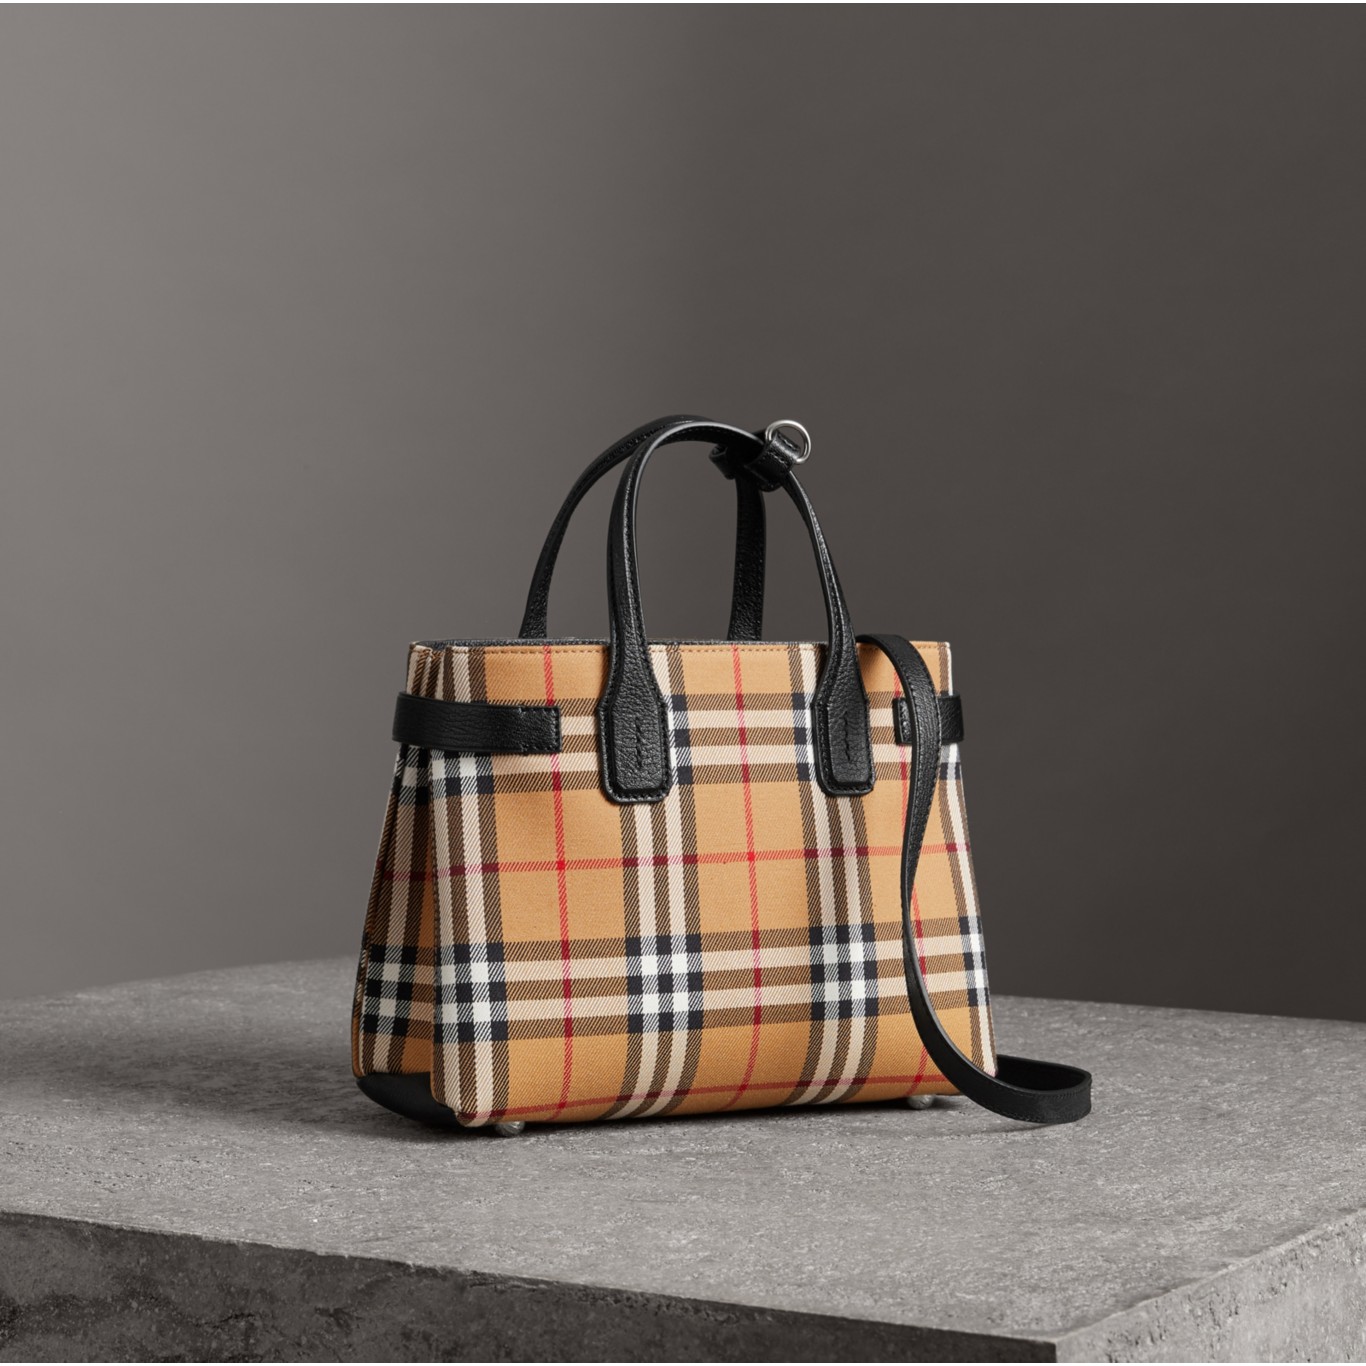 Burberry: Introducing the new Banner bag – Suitably Stylish